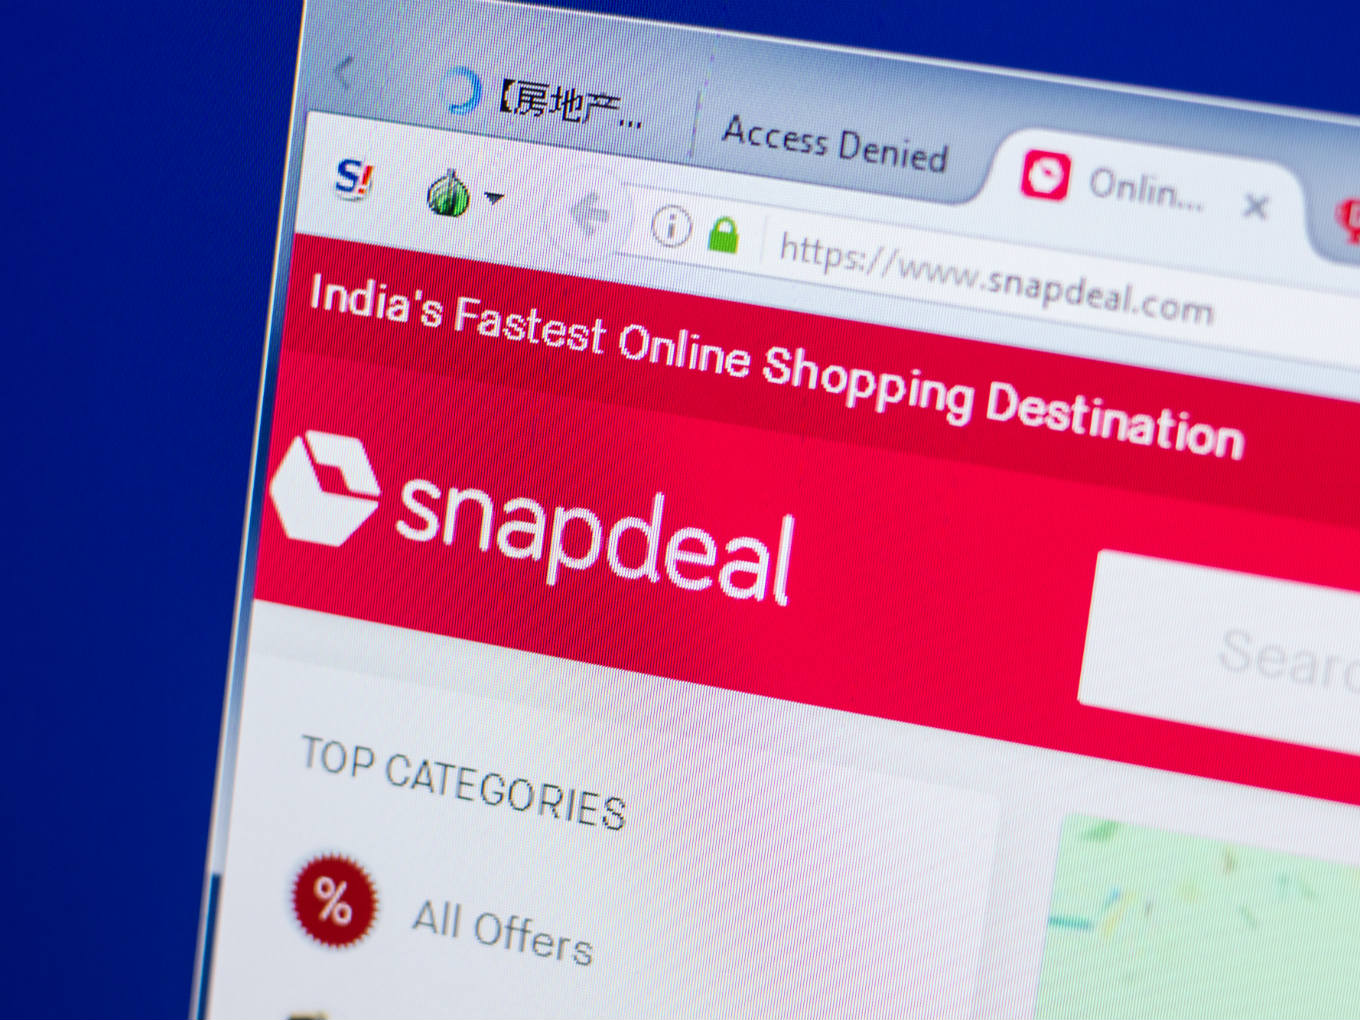 Snapdeal, Casio Caught In Legal Battle Over Alleged Counterfeit Products